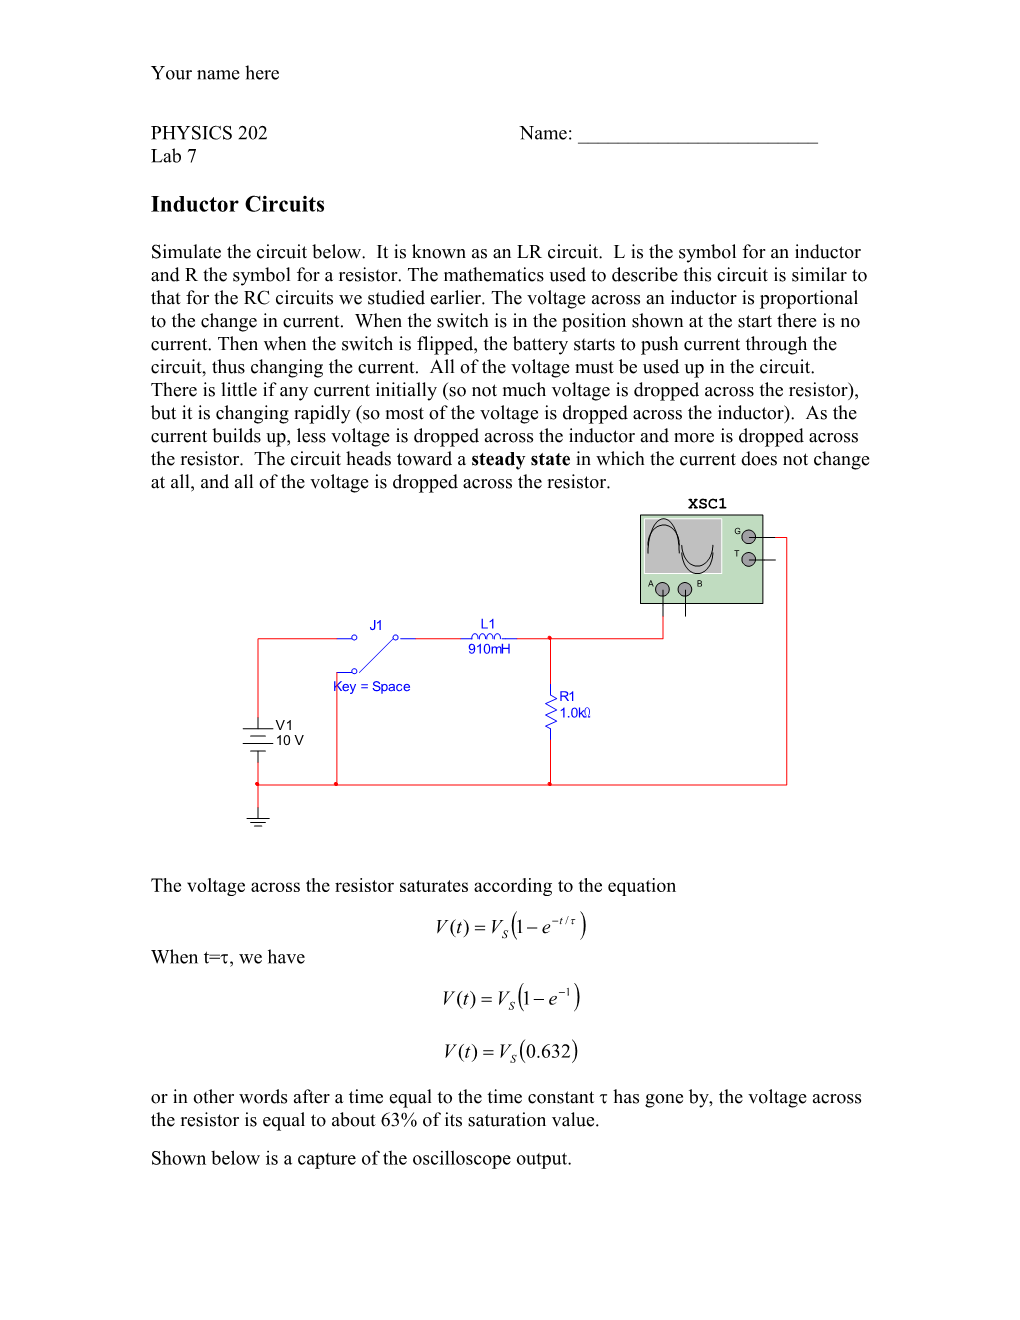 Inductor Circuits